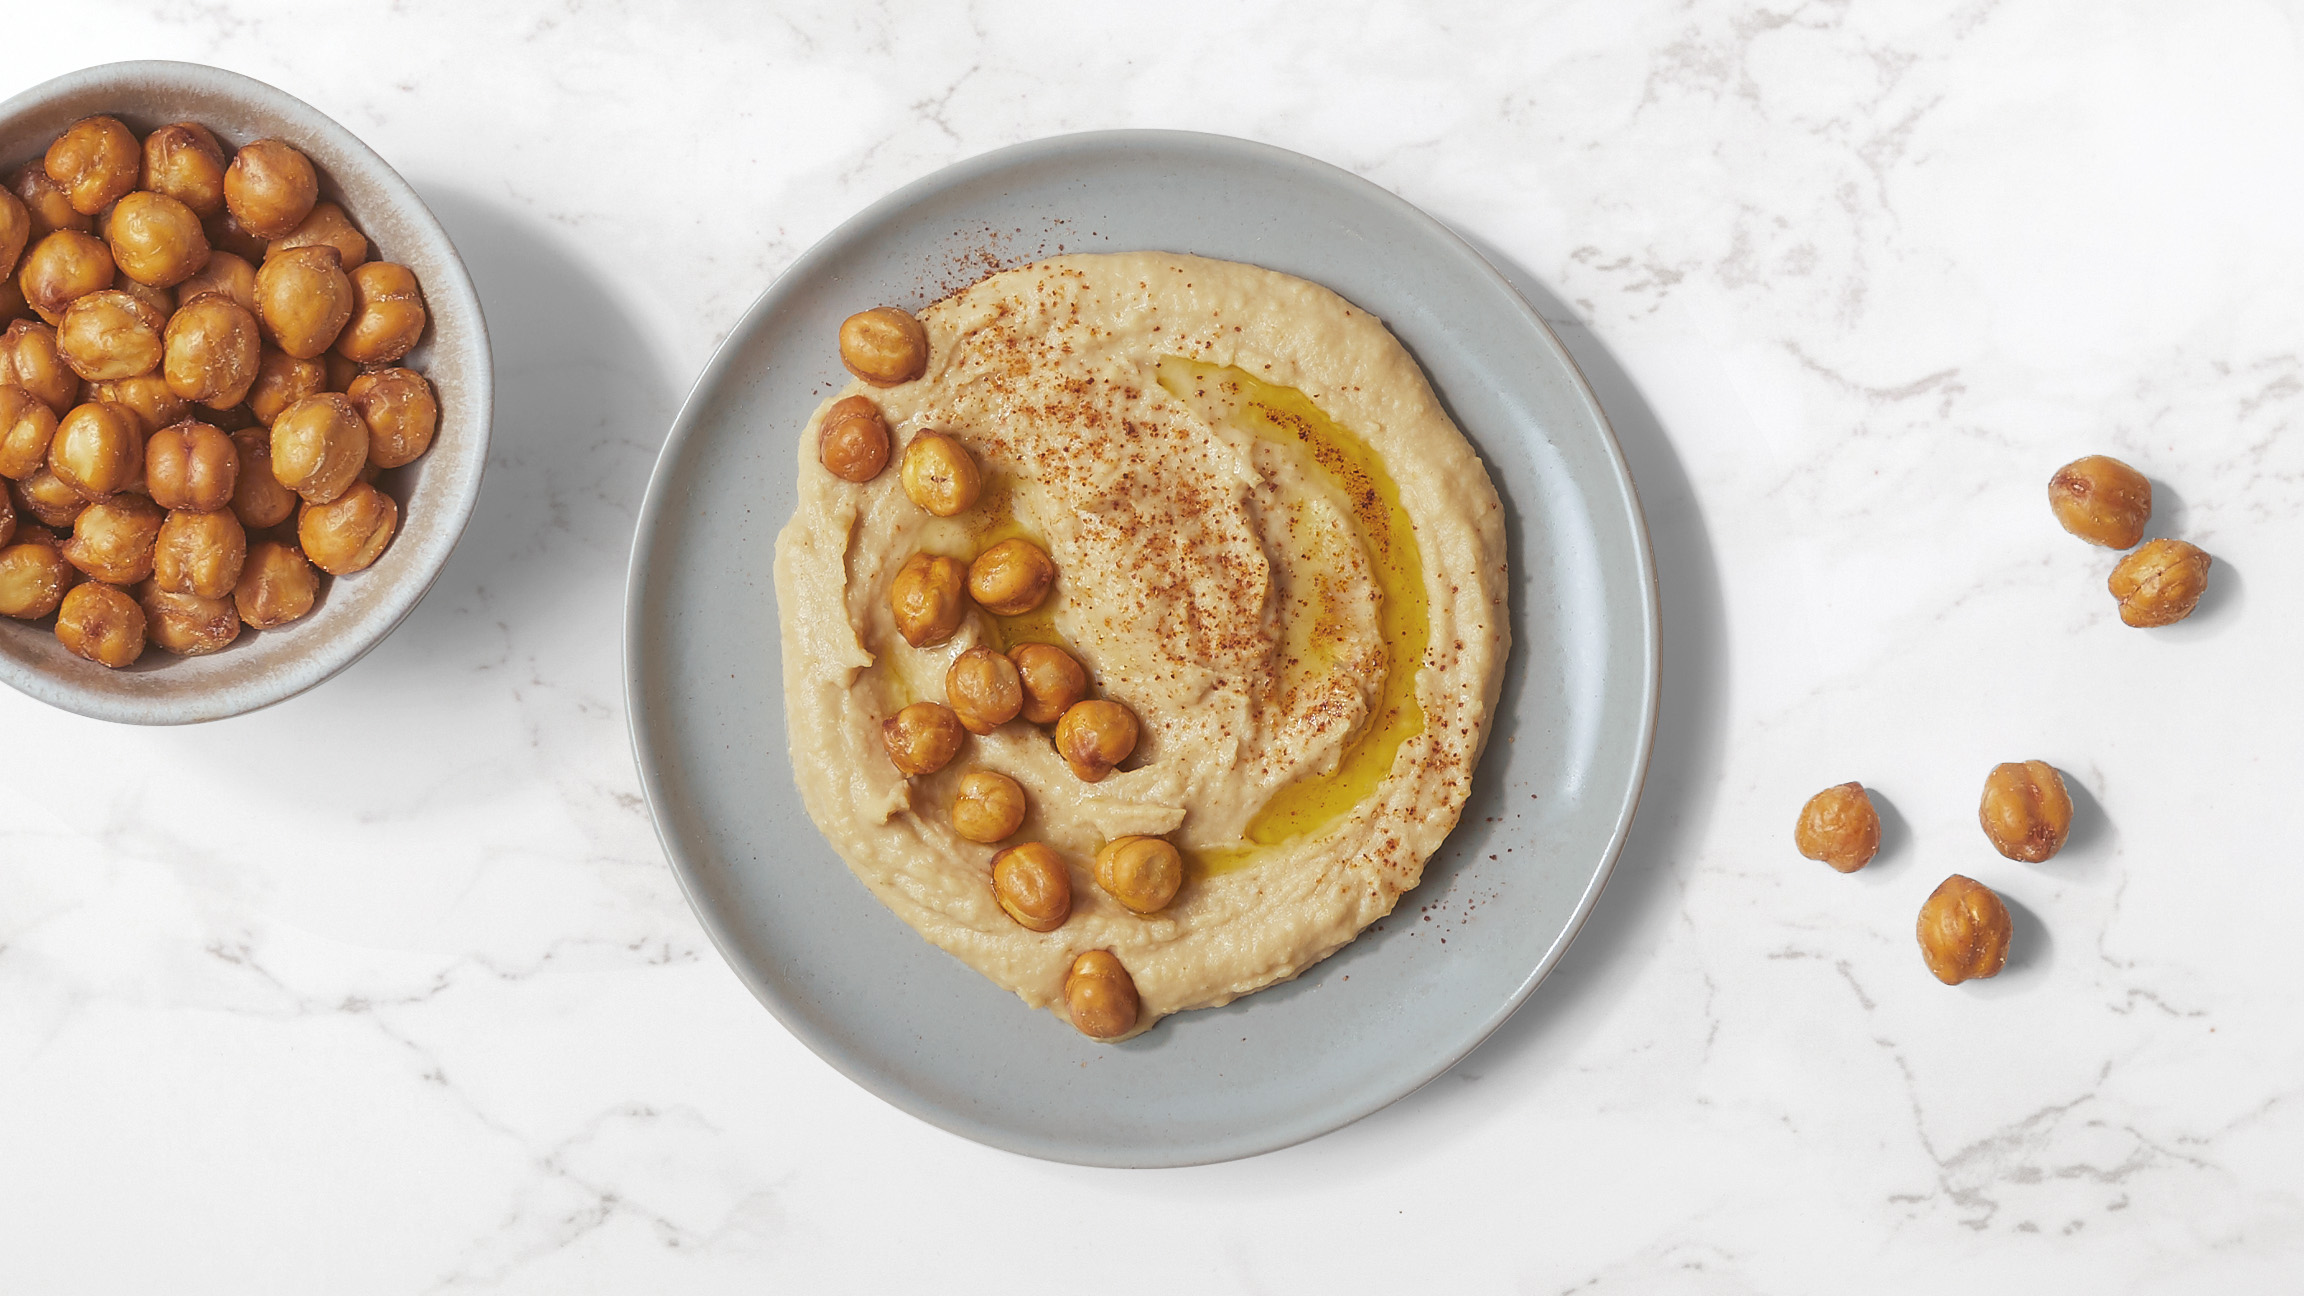 Dish of Roasted & Salted Chickpeas in Hummus with a drizzle of oil and paprika